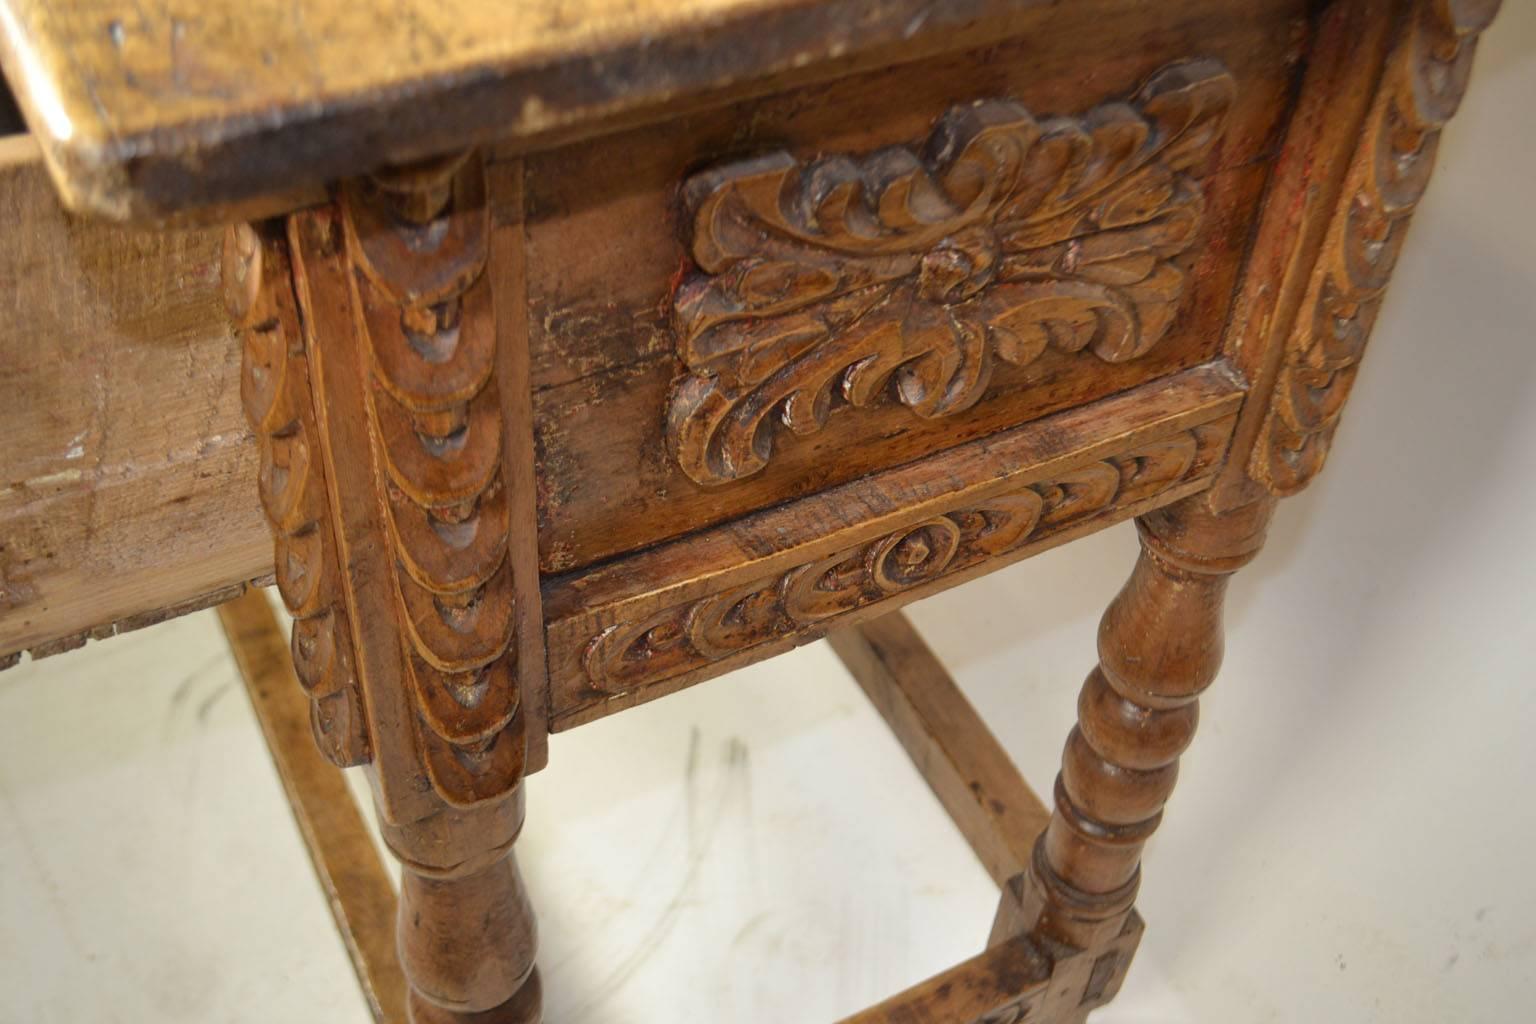 Carved 18th Century Spanish Colonial Side Table, Peru